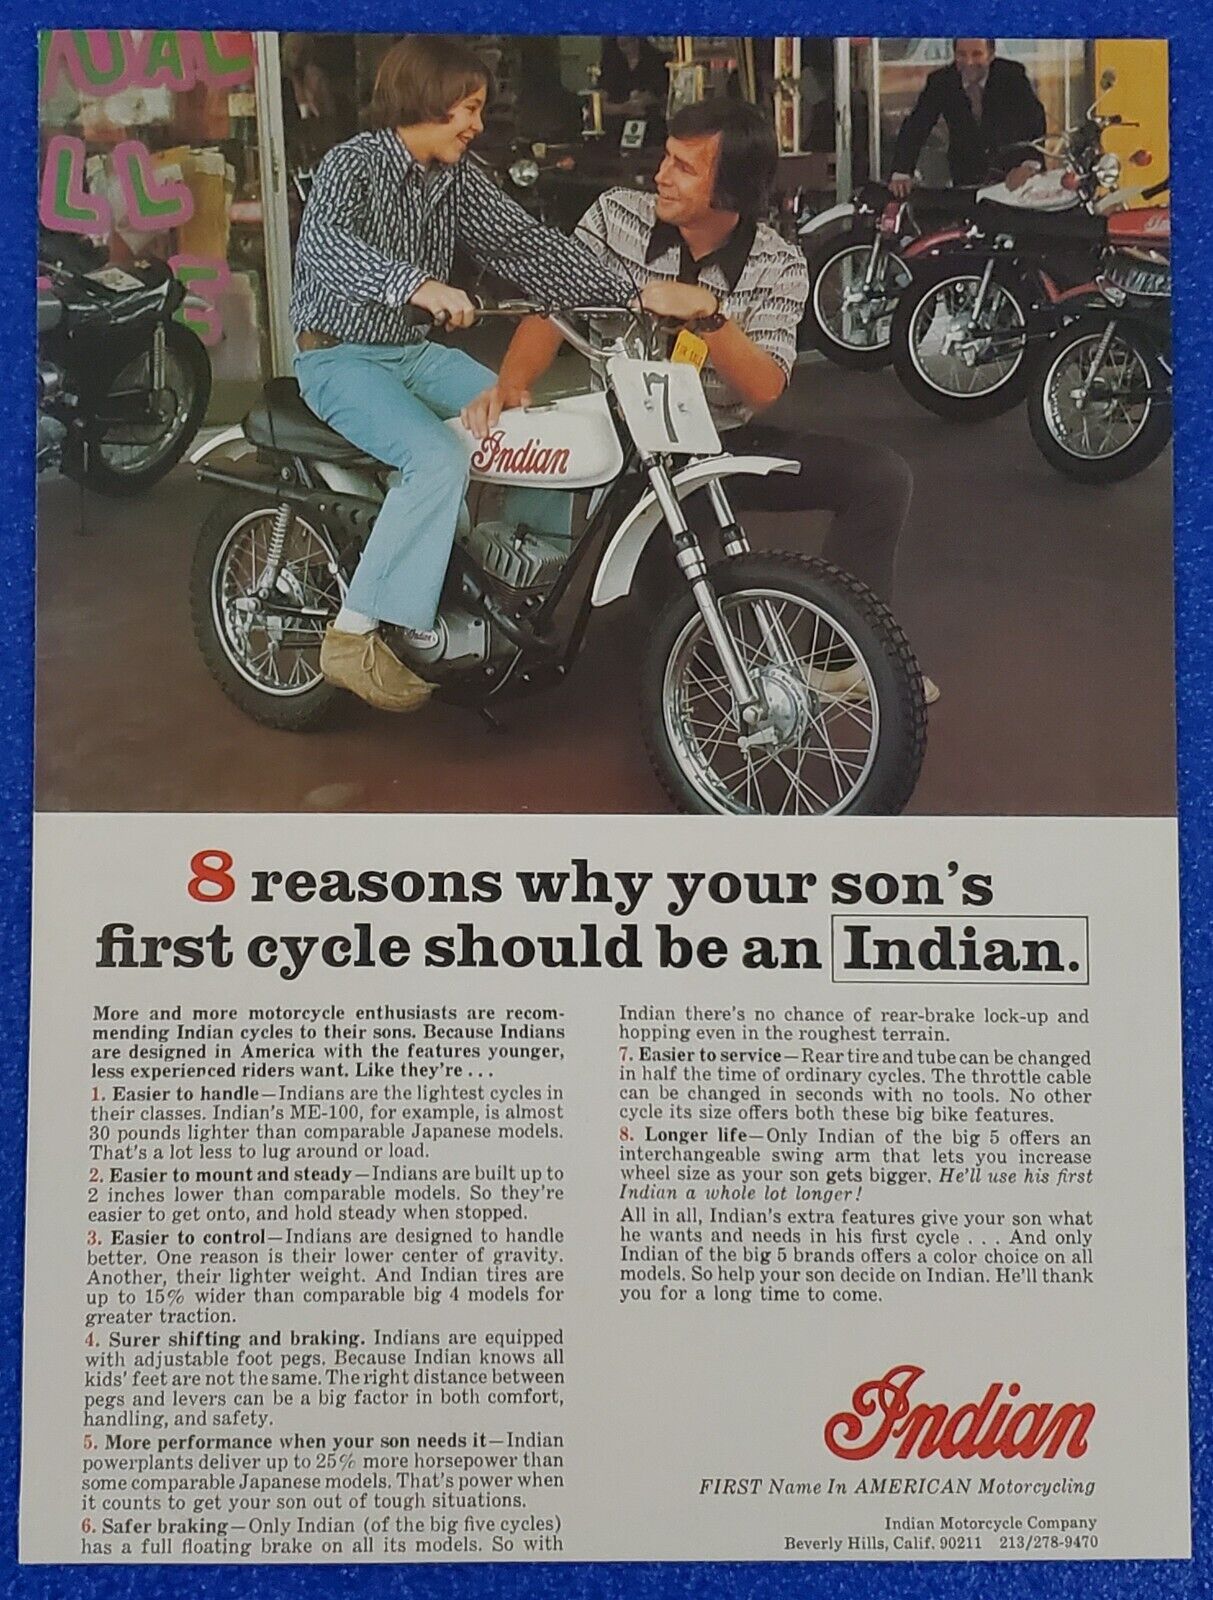 1974 INDIAN MOTORCYCLE ORIGINAL PRINT AD MINIBIKE - 8 REASONS WHY - CLASSIC AD